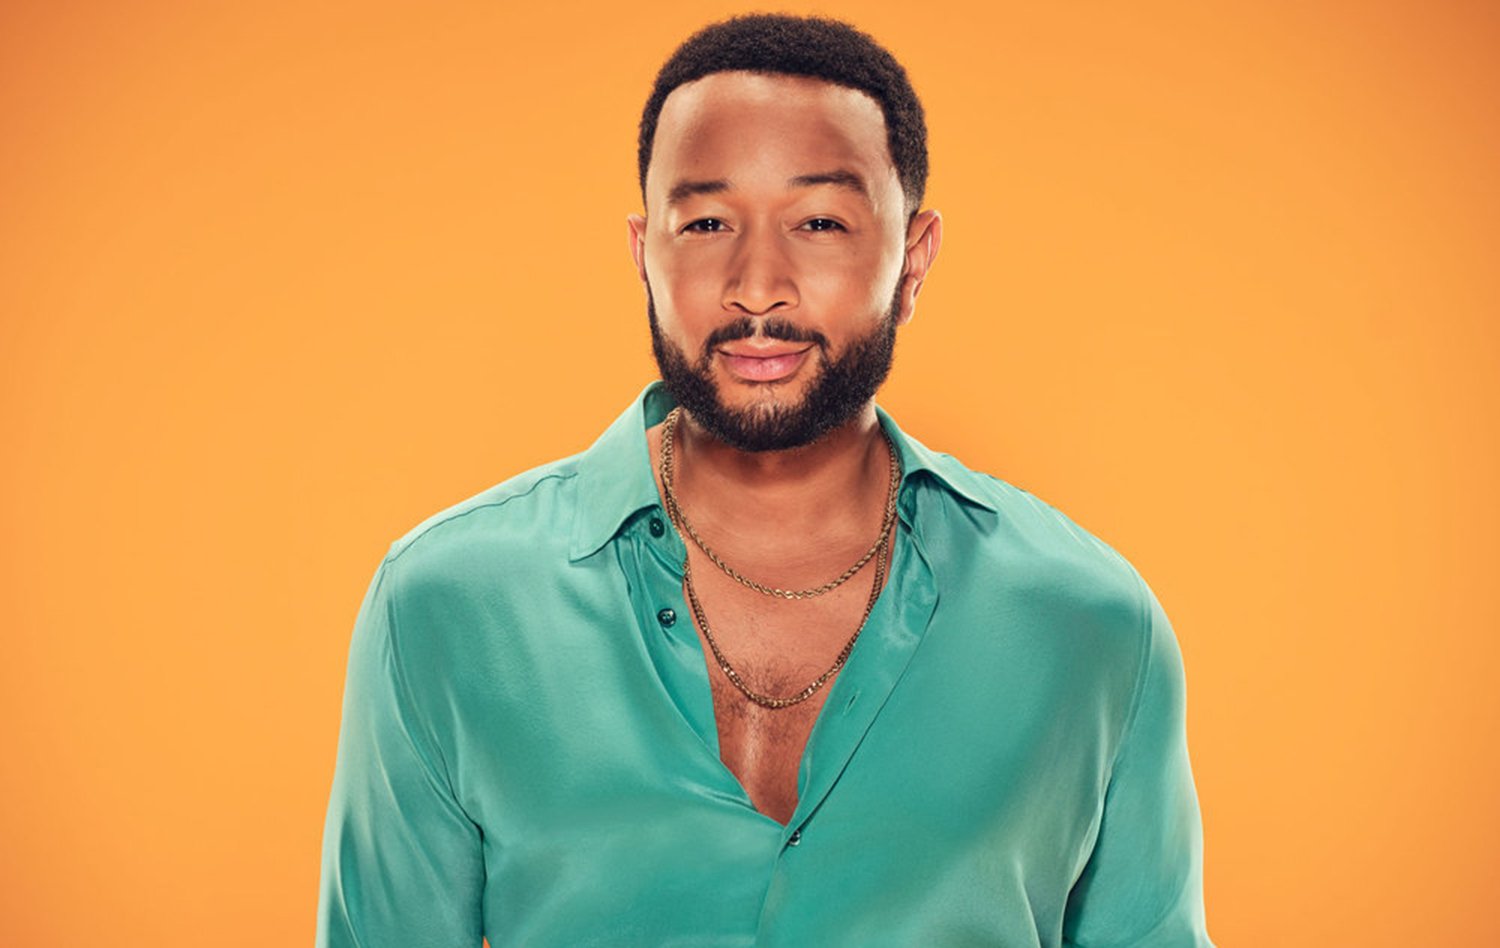 ‘The Voice’ Season 22: Why John Legend Doesn’t Usually Turn for Artists Who Sing His Songs